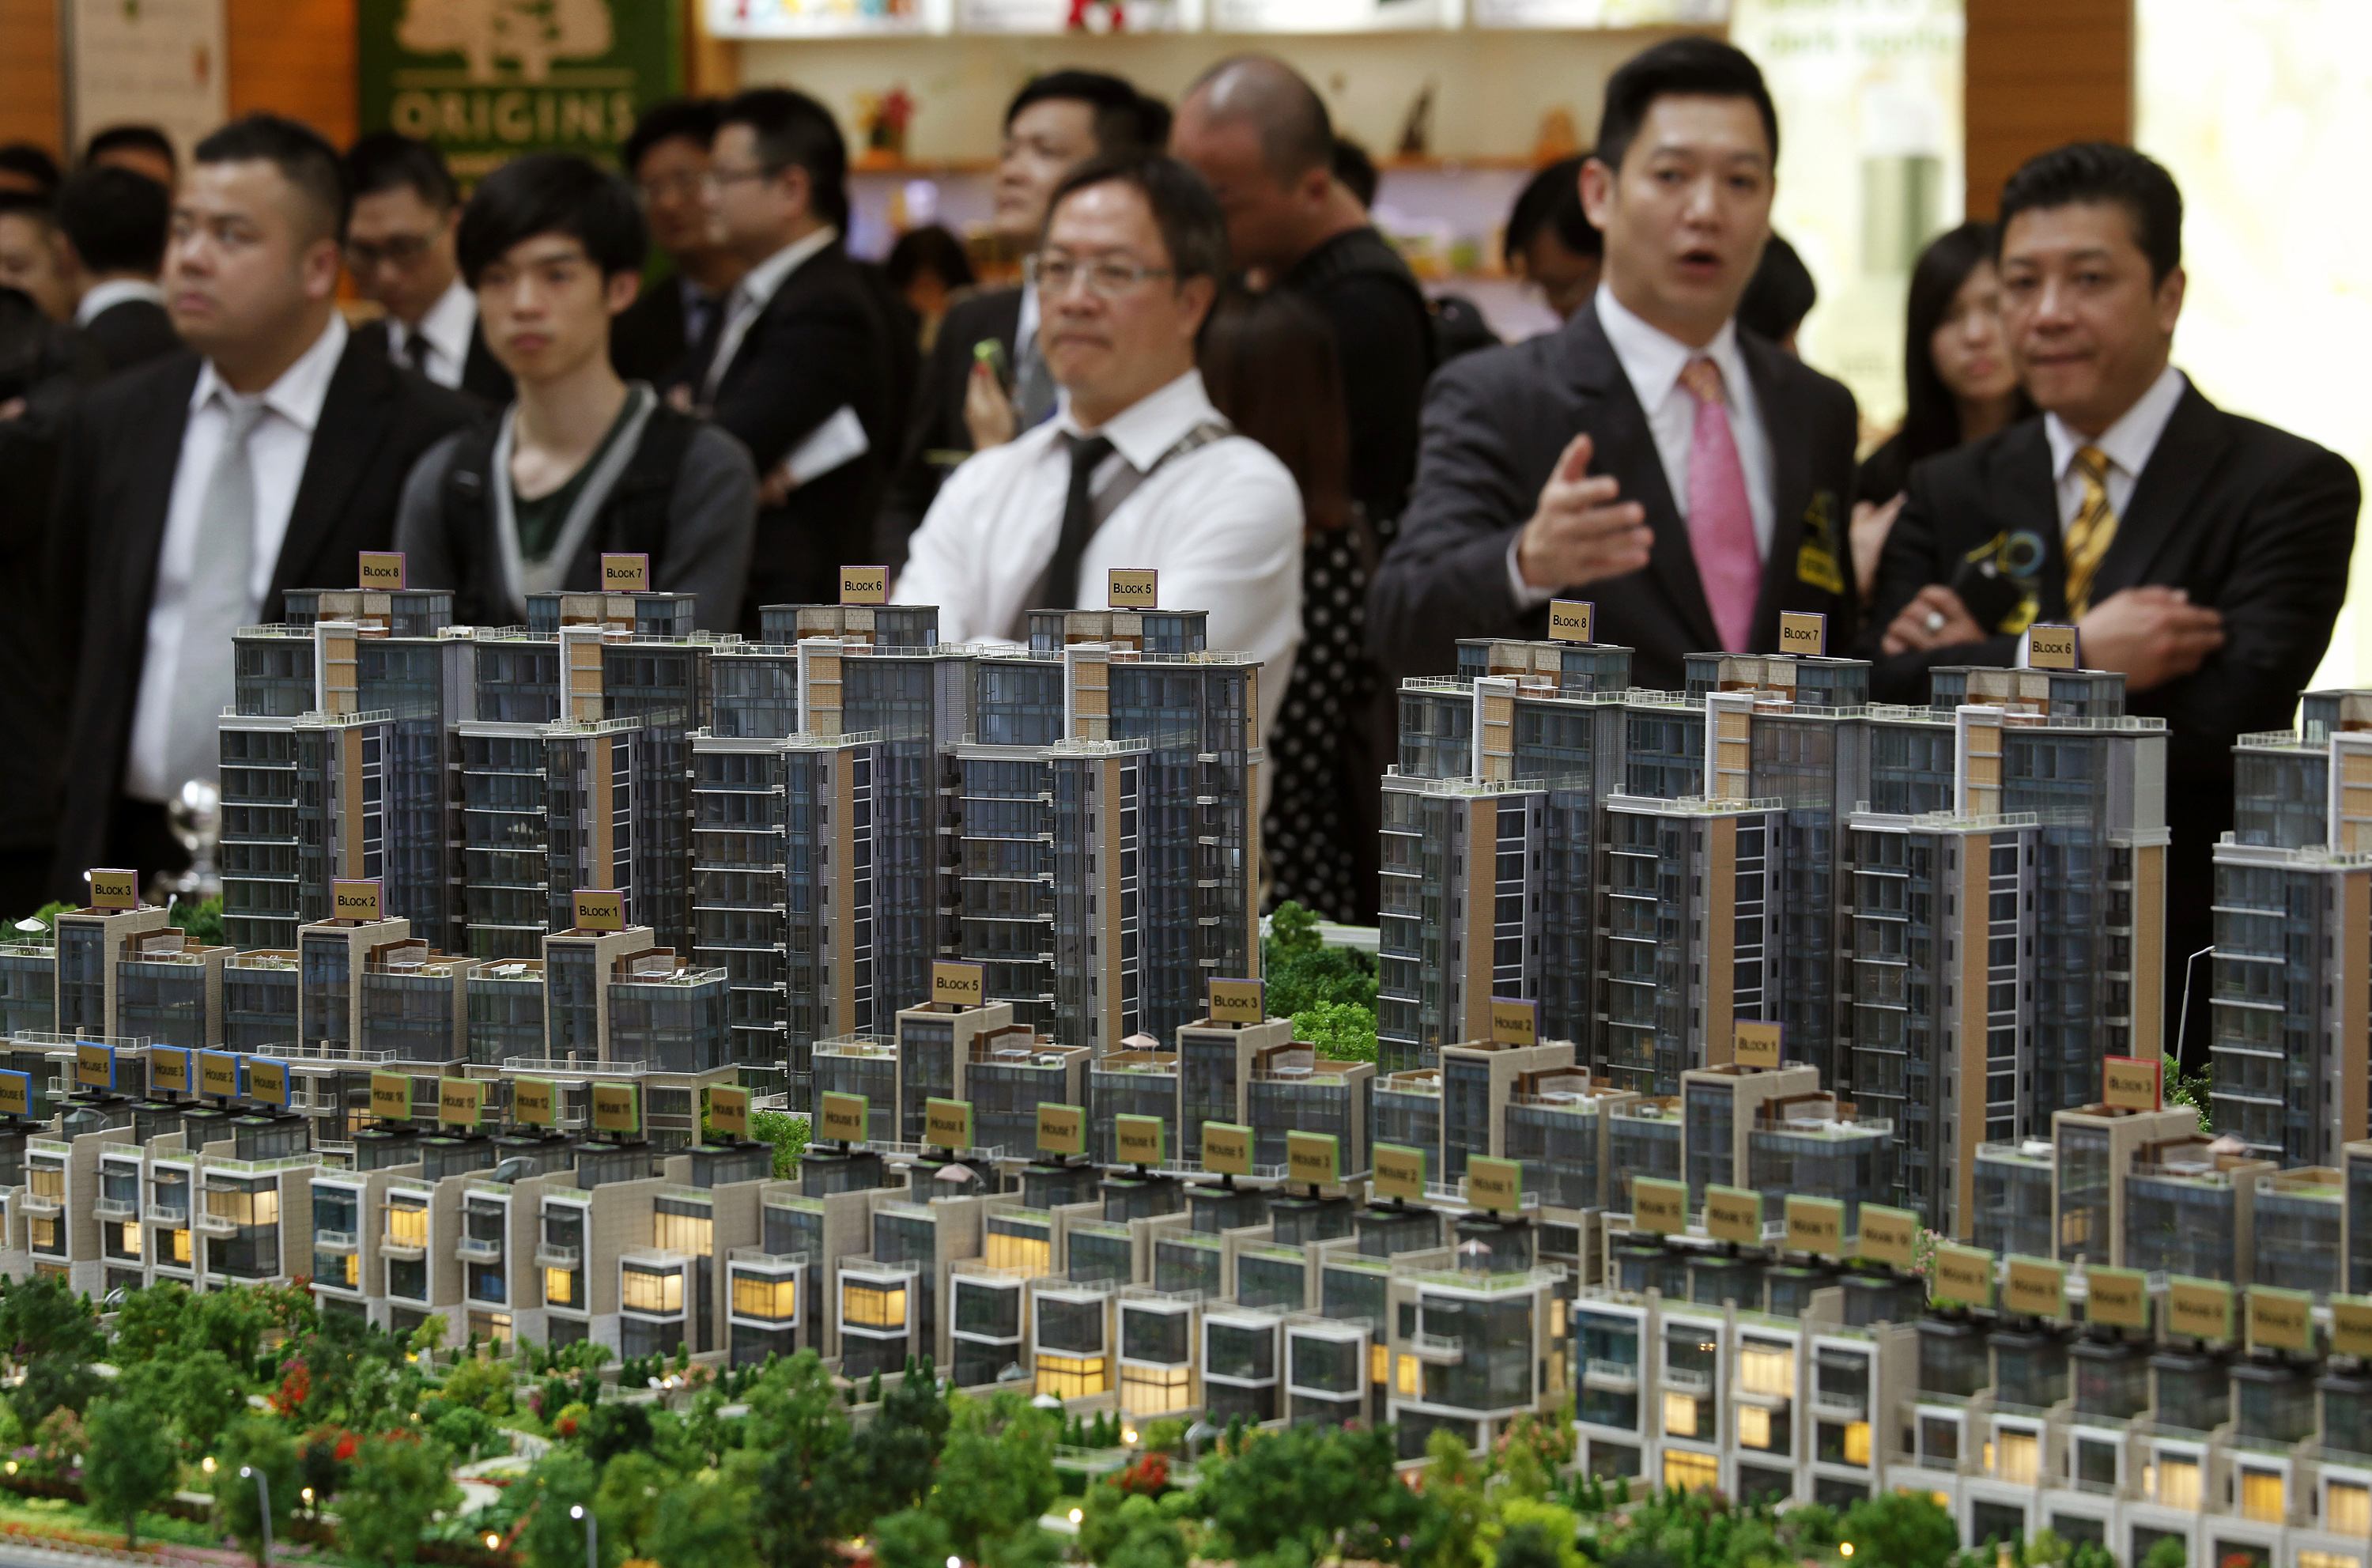 Property sales agents chat during the roadshow of a residential property development in Hong Kong. Photo: Reuters